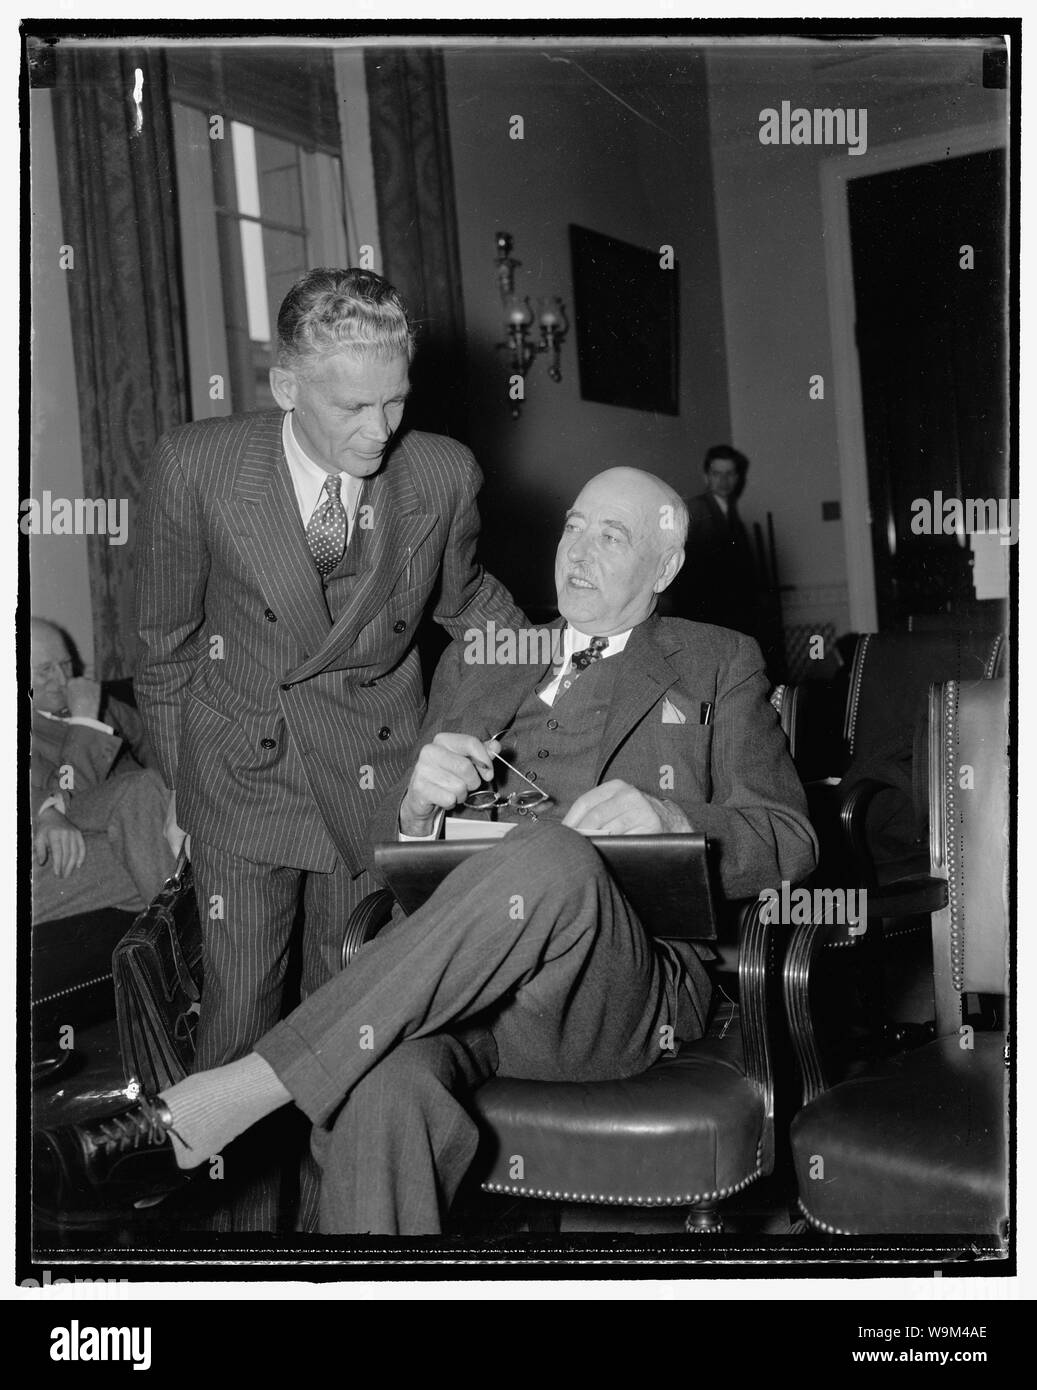 Appear before house rivers and harbors committee. Washington, D.C., Nov. 23. Stuart Chase, (left) New York economist, and L.C. Sabine, of Cleveland, Vice-President of the Lake Carriers Association, were the first witnesses called today as the House Rivers and Harbors Committee began hearings on a bill to create seven Regional Planning Authorities. Chase told the committee that free competition no longer is operating over a broad part of the economic front. He predicted further dislocation of man and his natural resources unless there is planned economics and conservation. 11/23/37 Stock Photo